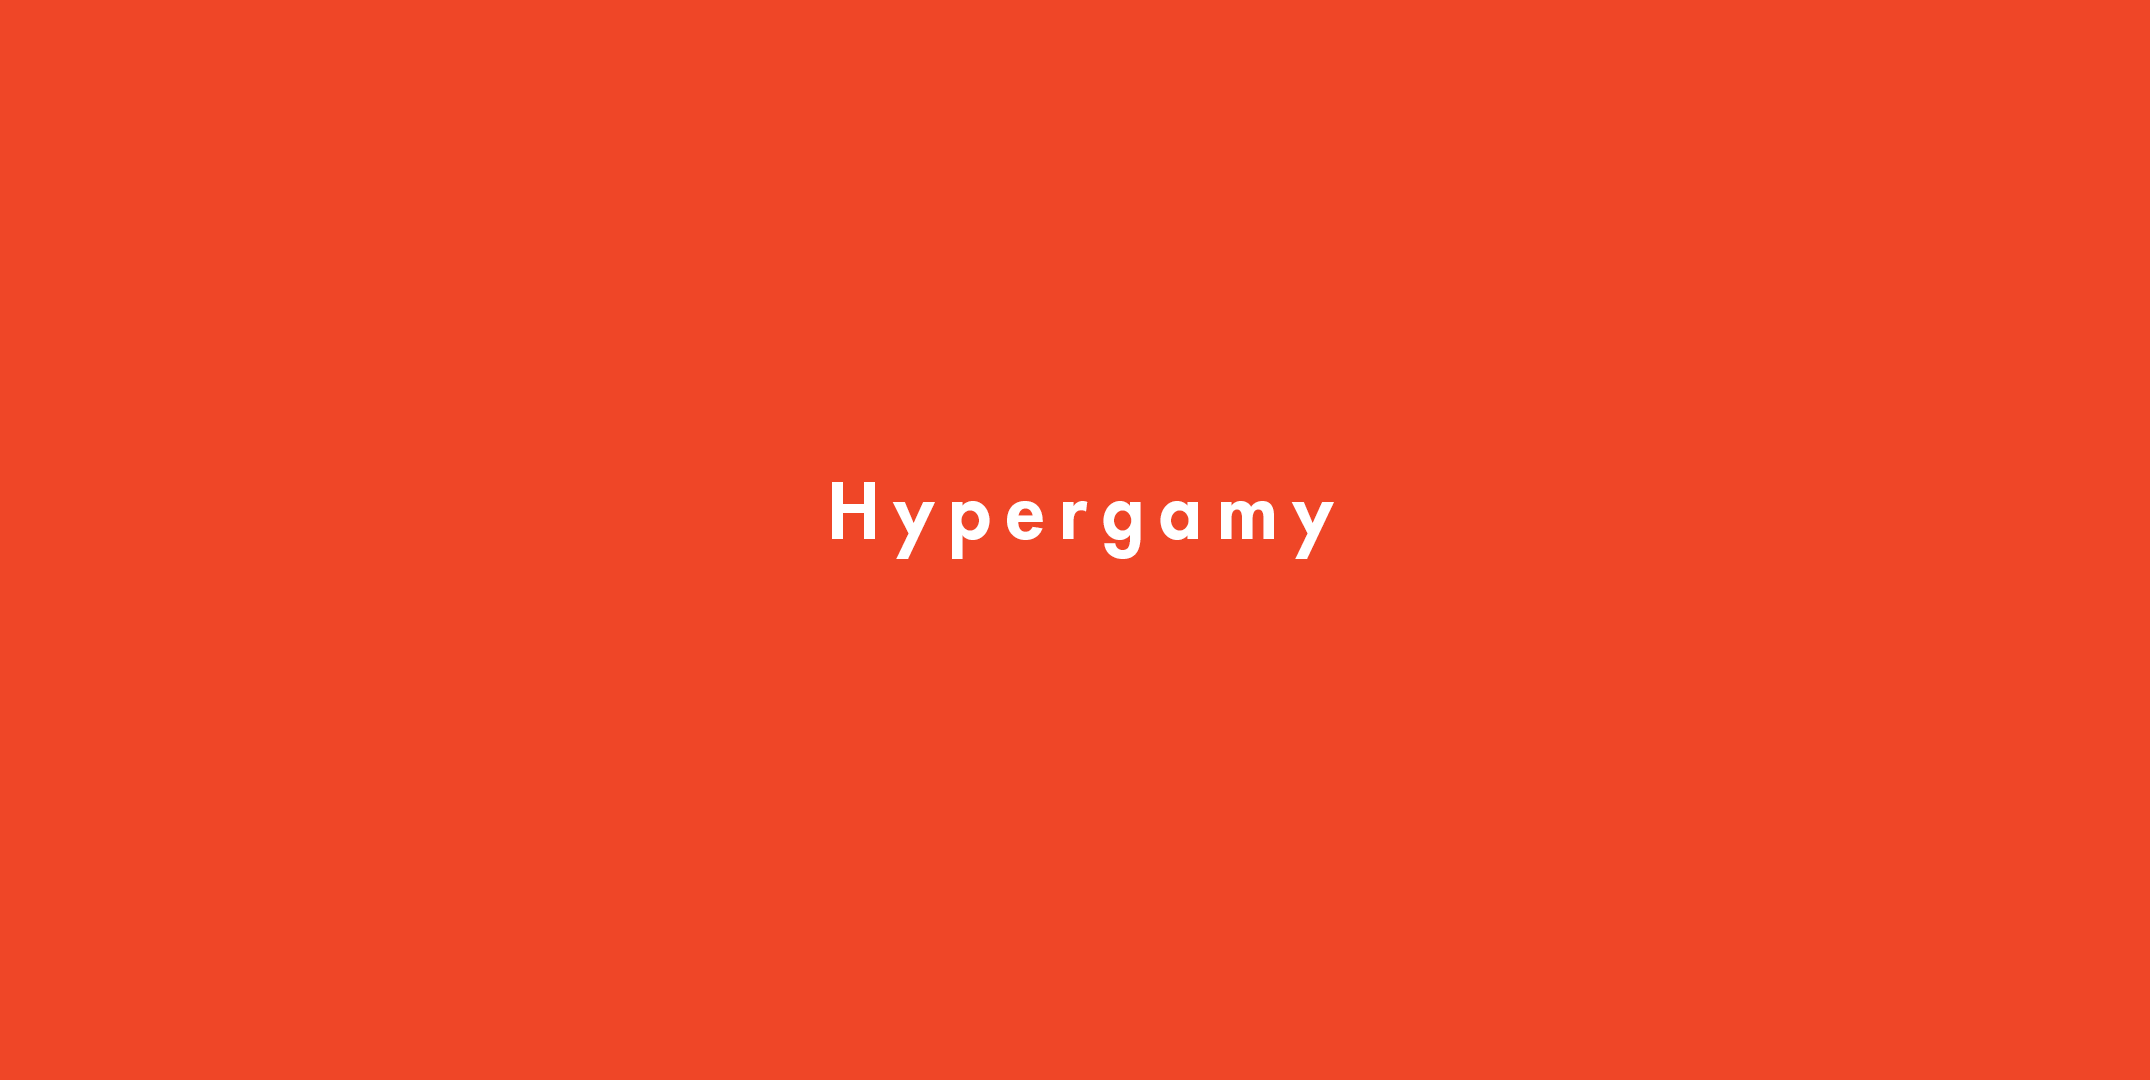 Hypergamy meaning